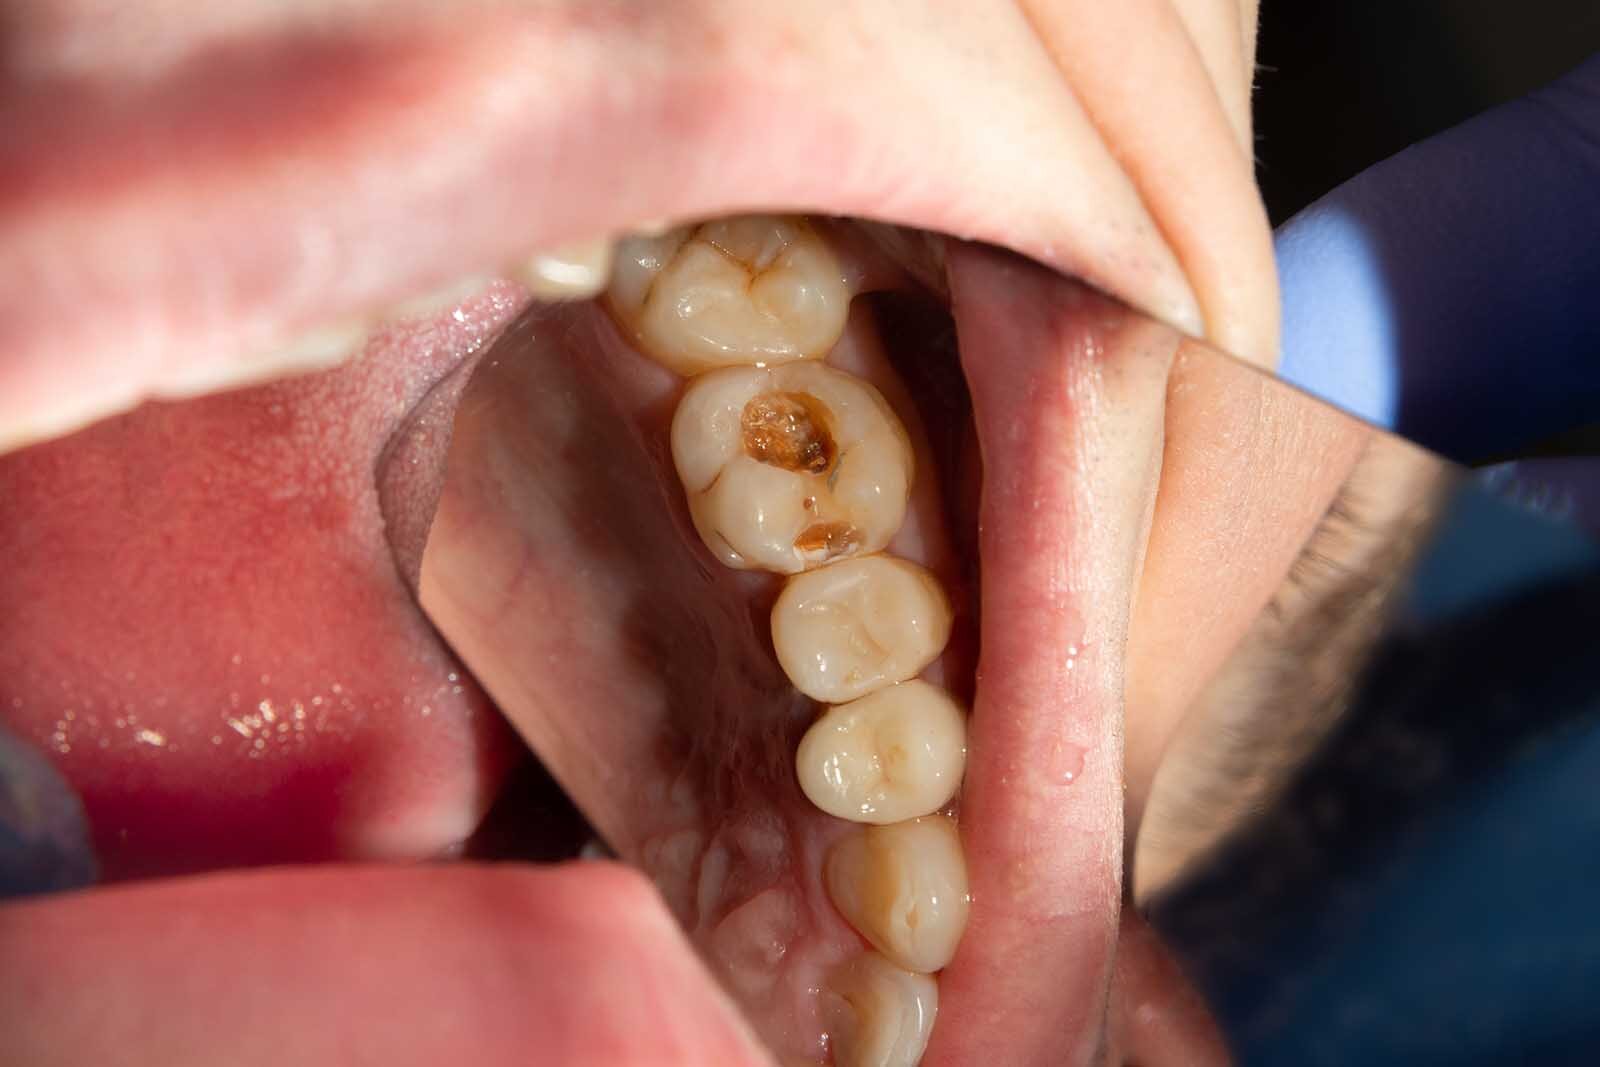 What are the signs of Dental Decay?